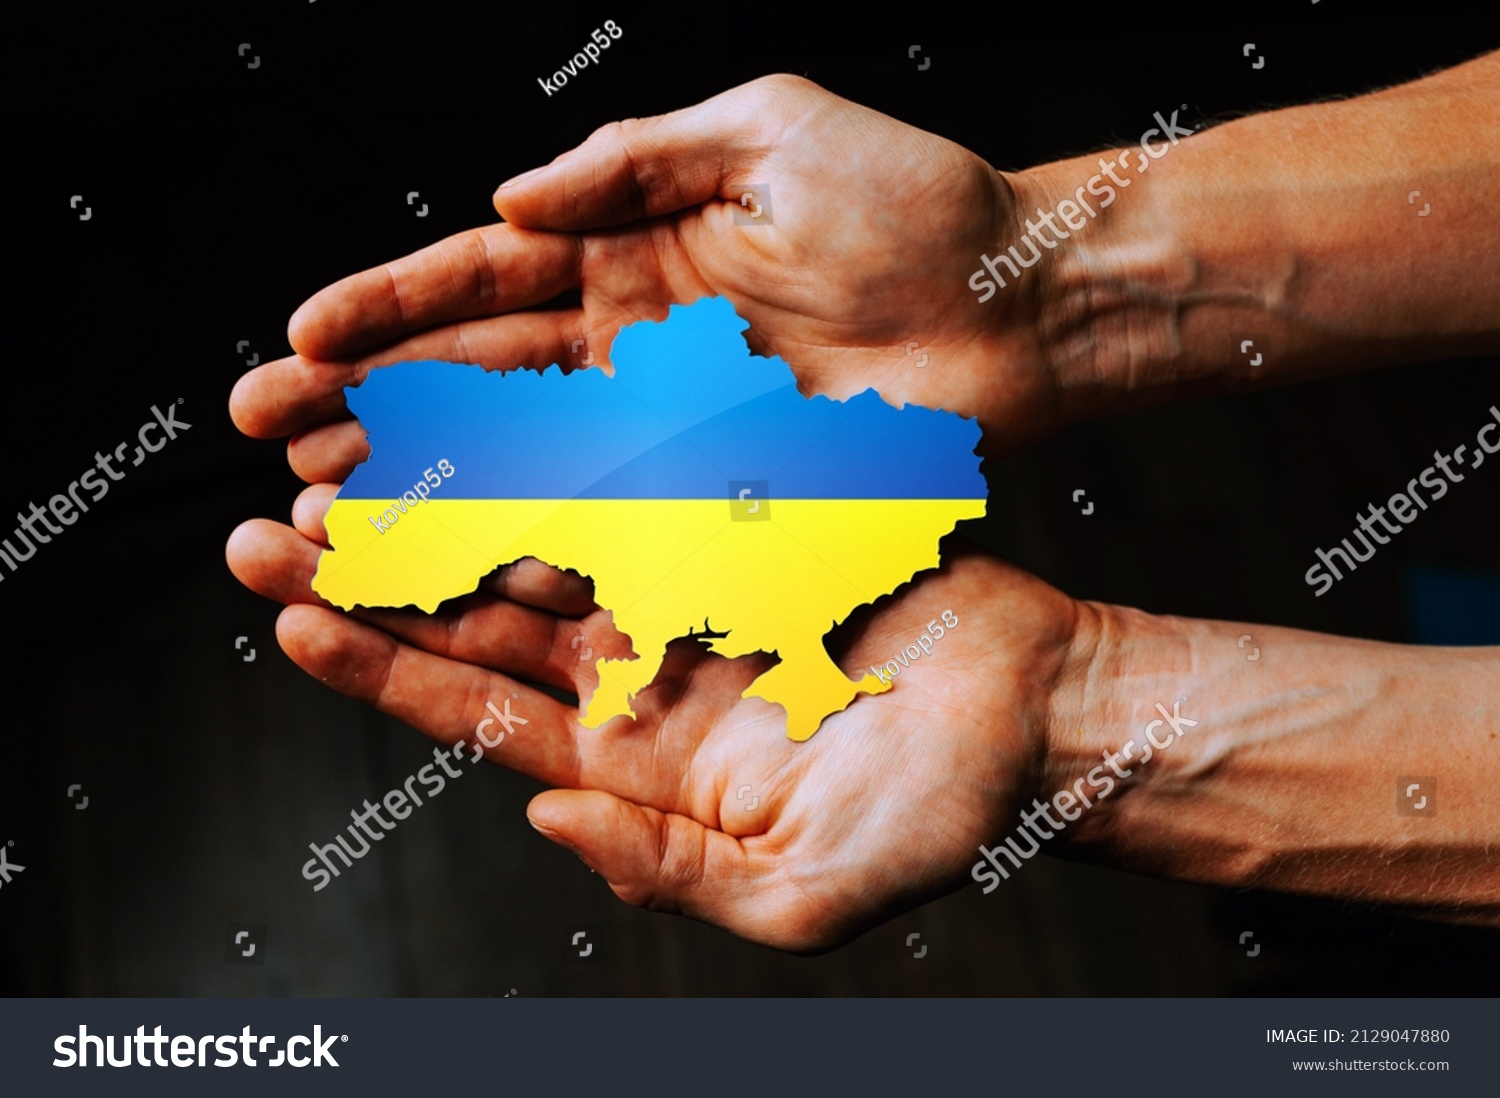 Support for Ukraine in the war with Russia. Hands holding the flag of Ukraine in the shape of the borders of Ukraine. #2129047880